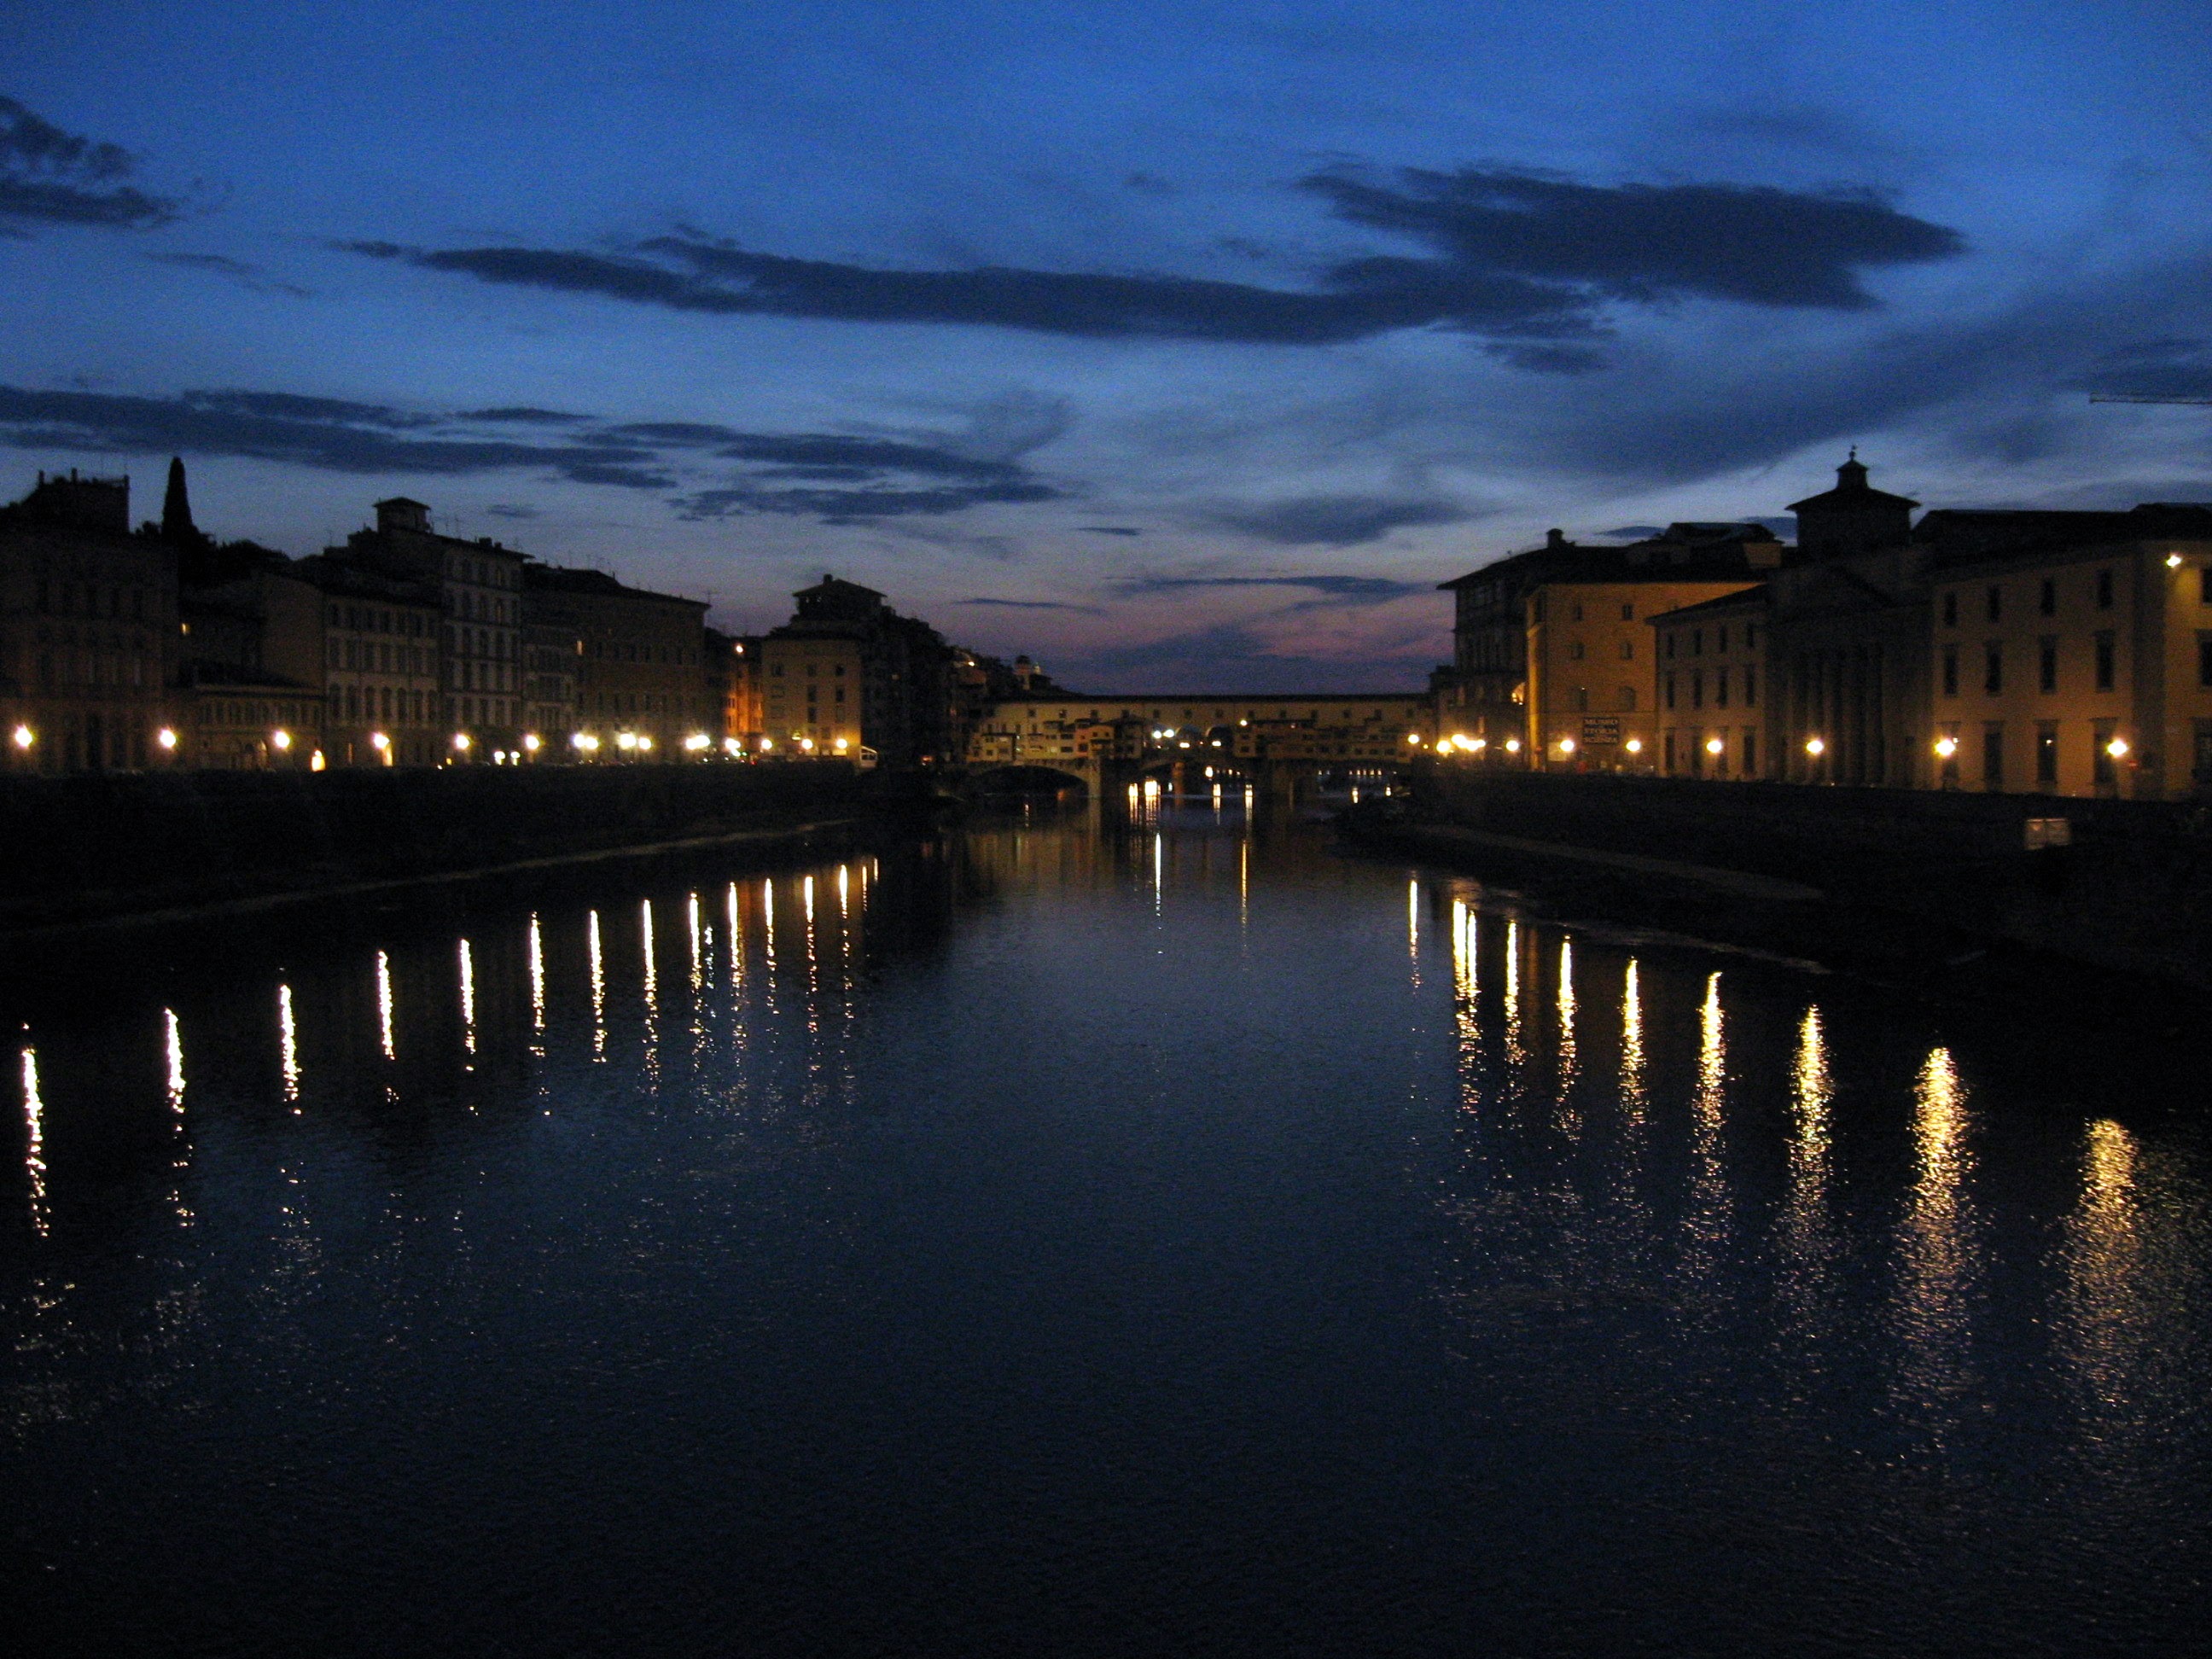 The photographer is standing on a bridge at night, looking down the Arno at the Ponte Vecchio. The streets on both sides of the river have street lights that are reflected in the dark water. The Ponte Vecchio is a bridge that has shops on it, so there are windows and several lights where it crosses the river. The sky is dusky blue with some clouds.